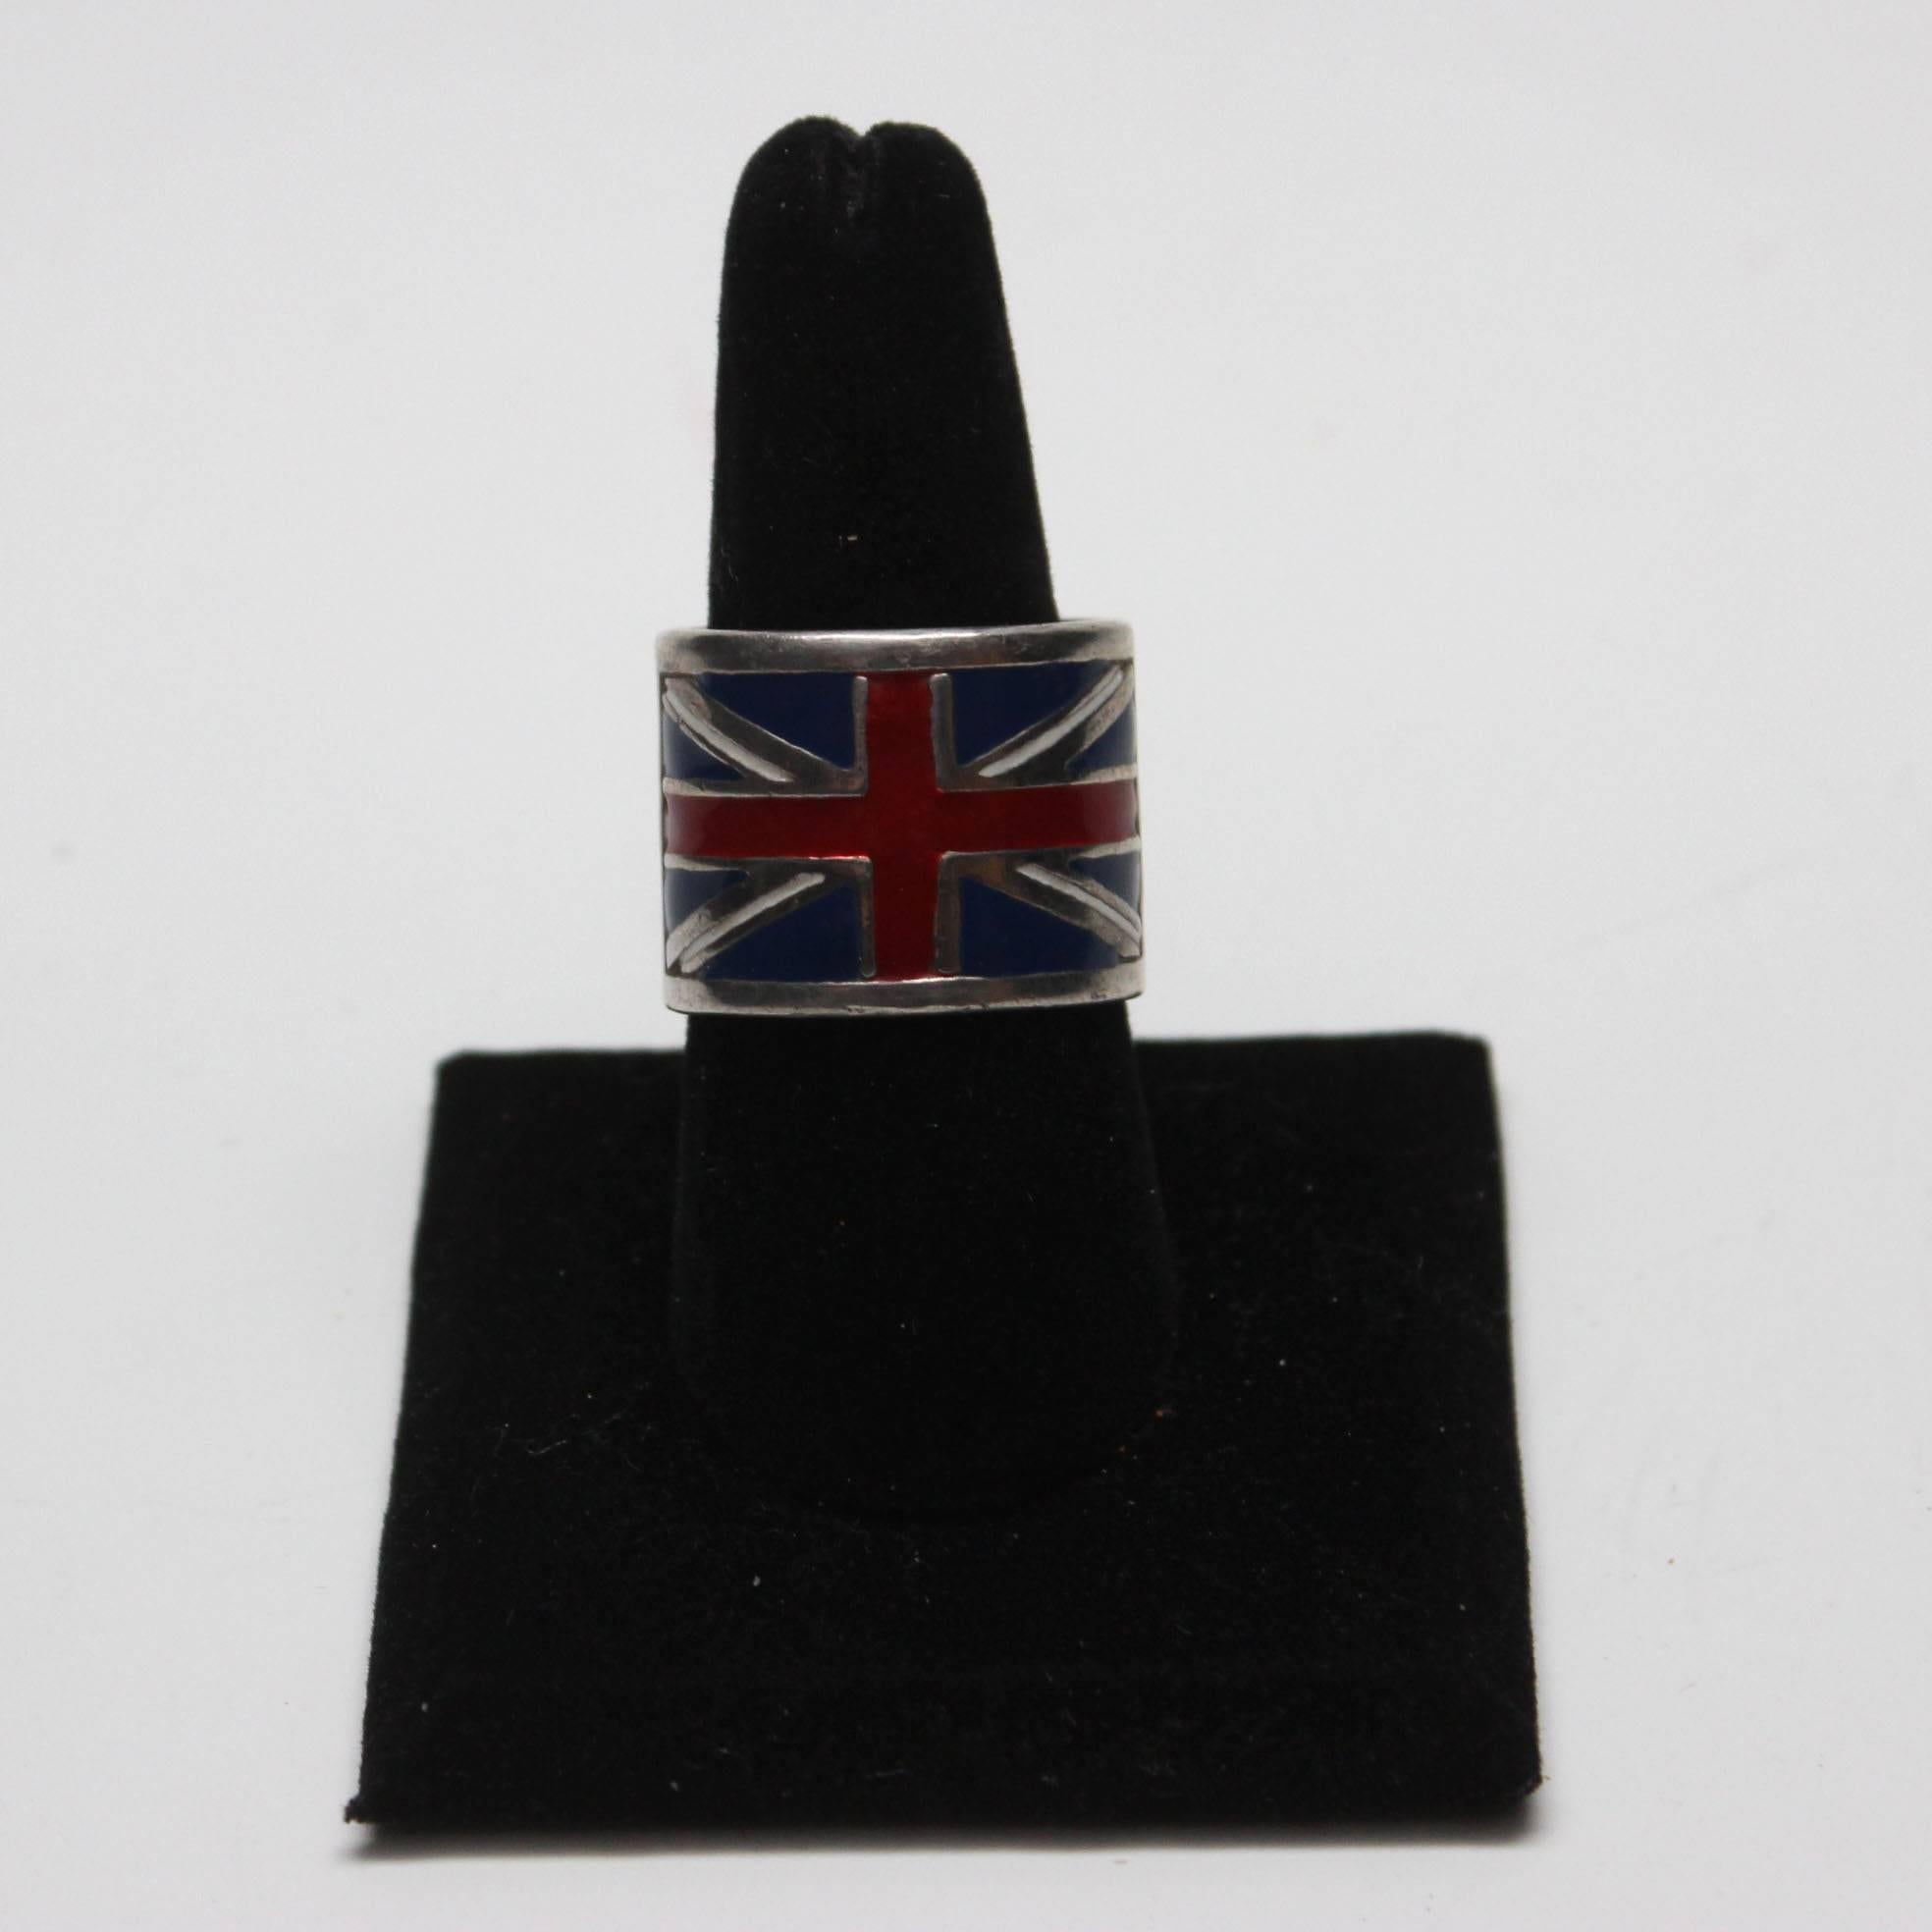 Hal Ludacer was a well known jewelry designer in the 1980's known for his unusual hand crafted jewelry with a rock and roll sensibility. This hevy weight solid silver ring has an enameled union jack on the front half of it. It is a mens size 10.5.